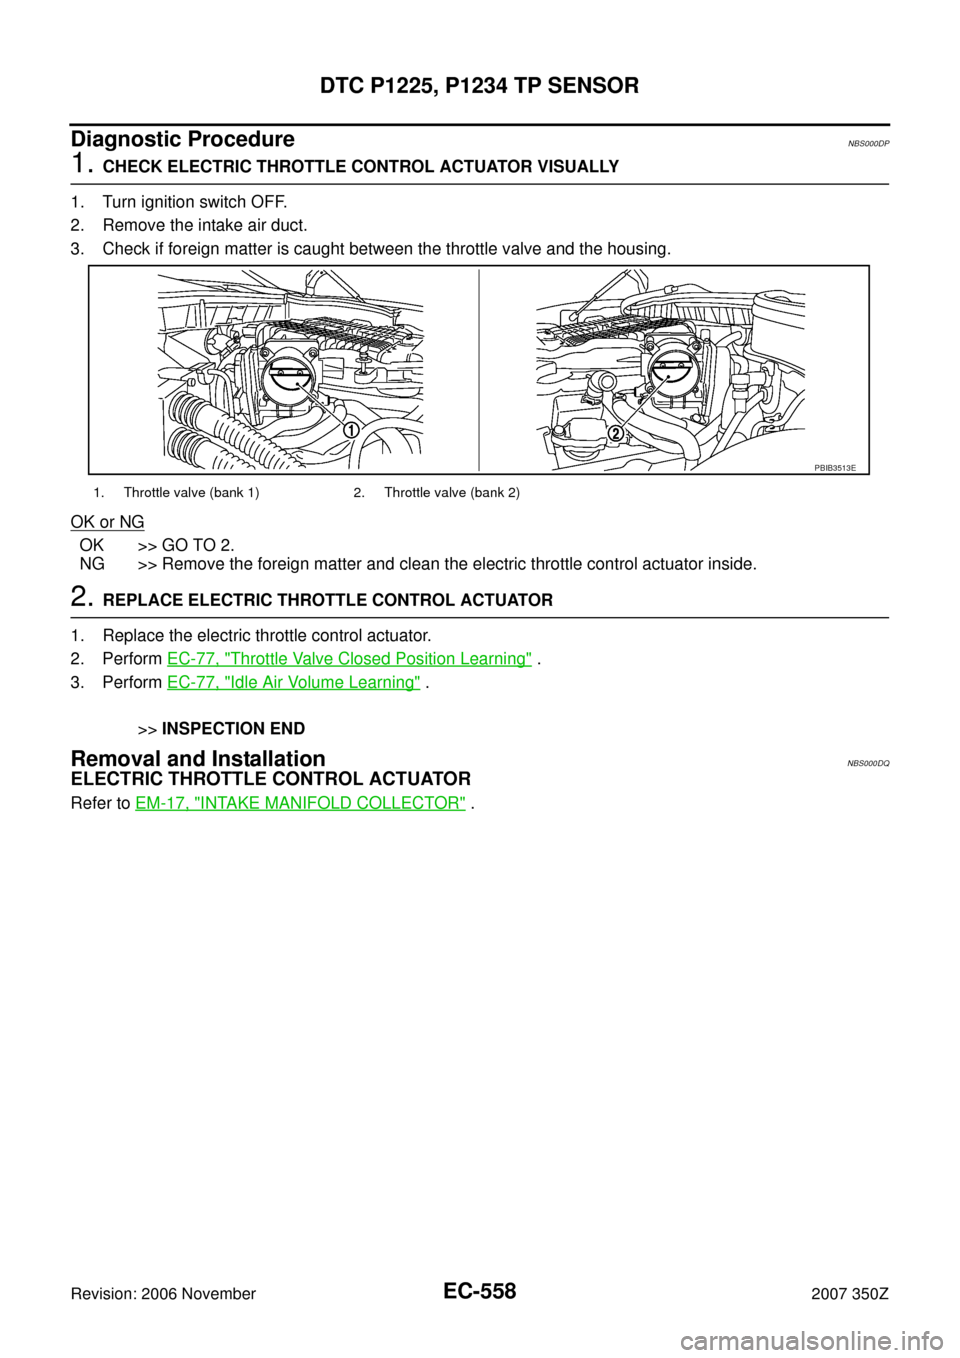 NISSAN 350Z 2007 Z33 Engine Control Workshop Manual EC-558
DTC P1225, P1234 TP SENSOR
Revision: 2006 November2007 350Z
Diagnostic ProcedureNBS000DP
1. CHECK ELECTRIC THROTTLE CONTROL ACTUATOR VISUALLY
1. Turn ignition switch OFF.
2. Remove the intake a